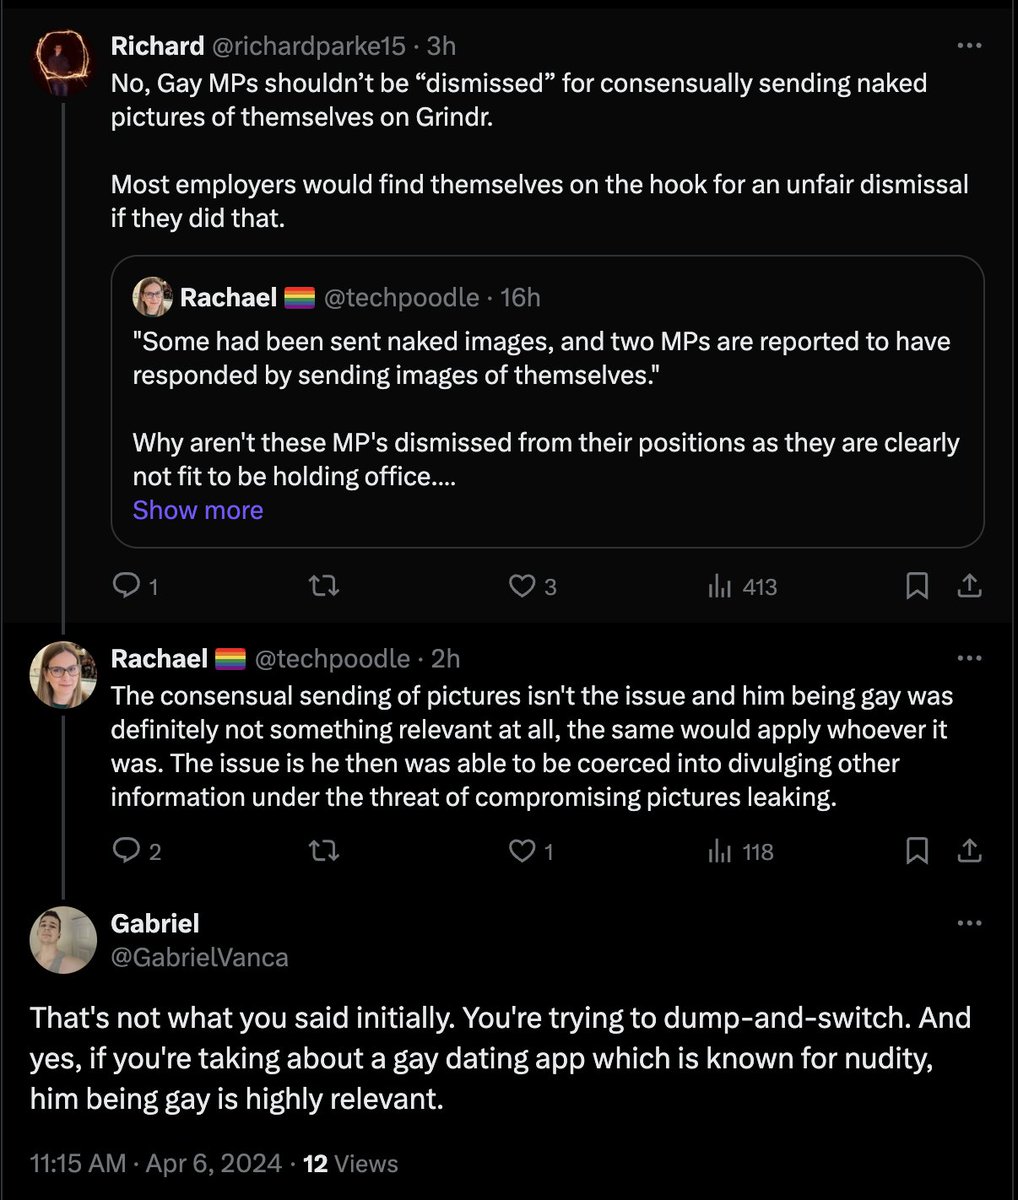 The terminally offended have decided to take offence to one of my tweets... I did not mention his sexuality, or any particular app. That's irrelevant. If you hold a position like an MP, regardless of who you are, how you identify, or your sexuality, you need to think through the…